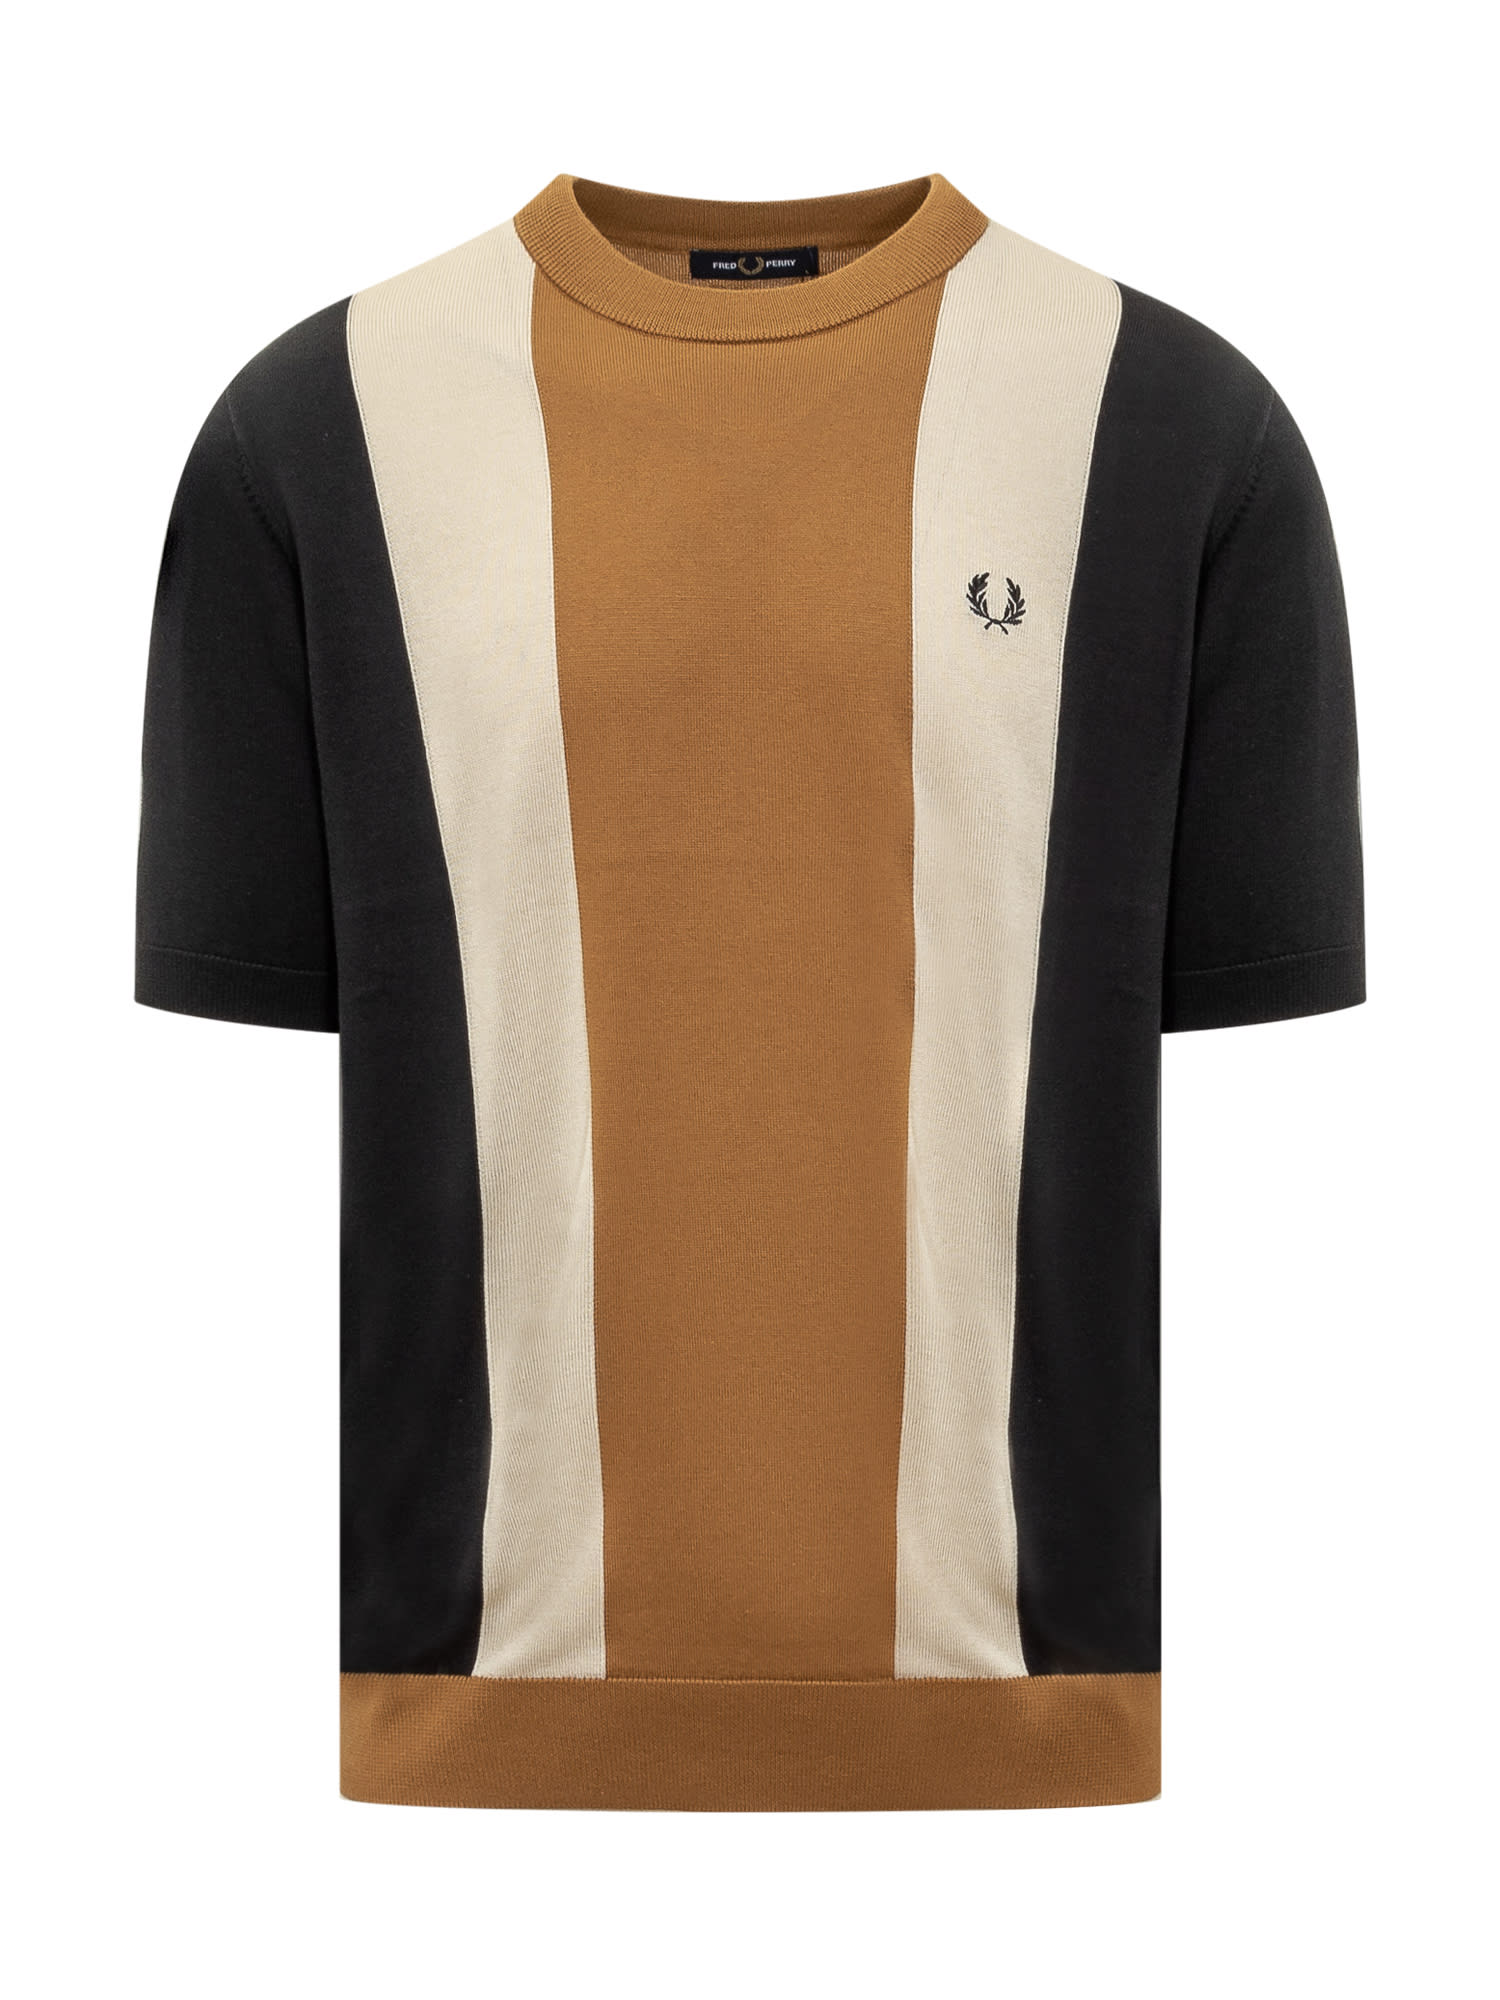 FRED PERRY STRIPED KNIT T-SHIRT.